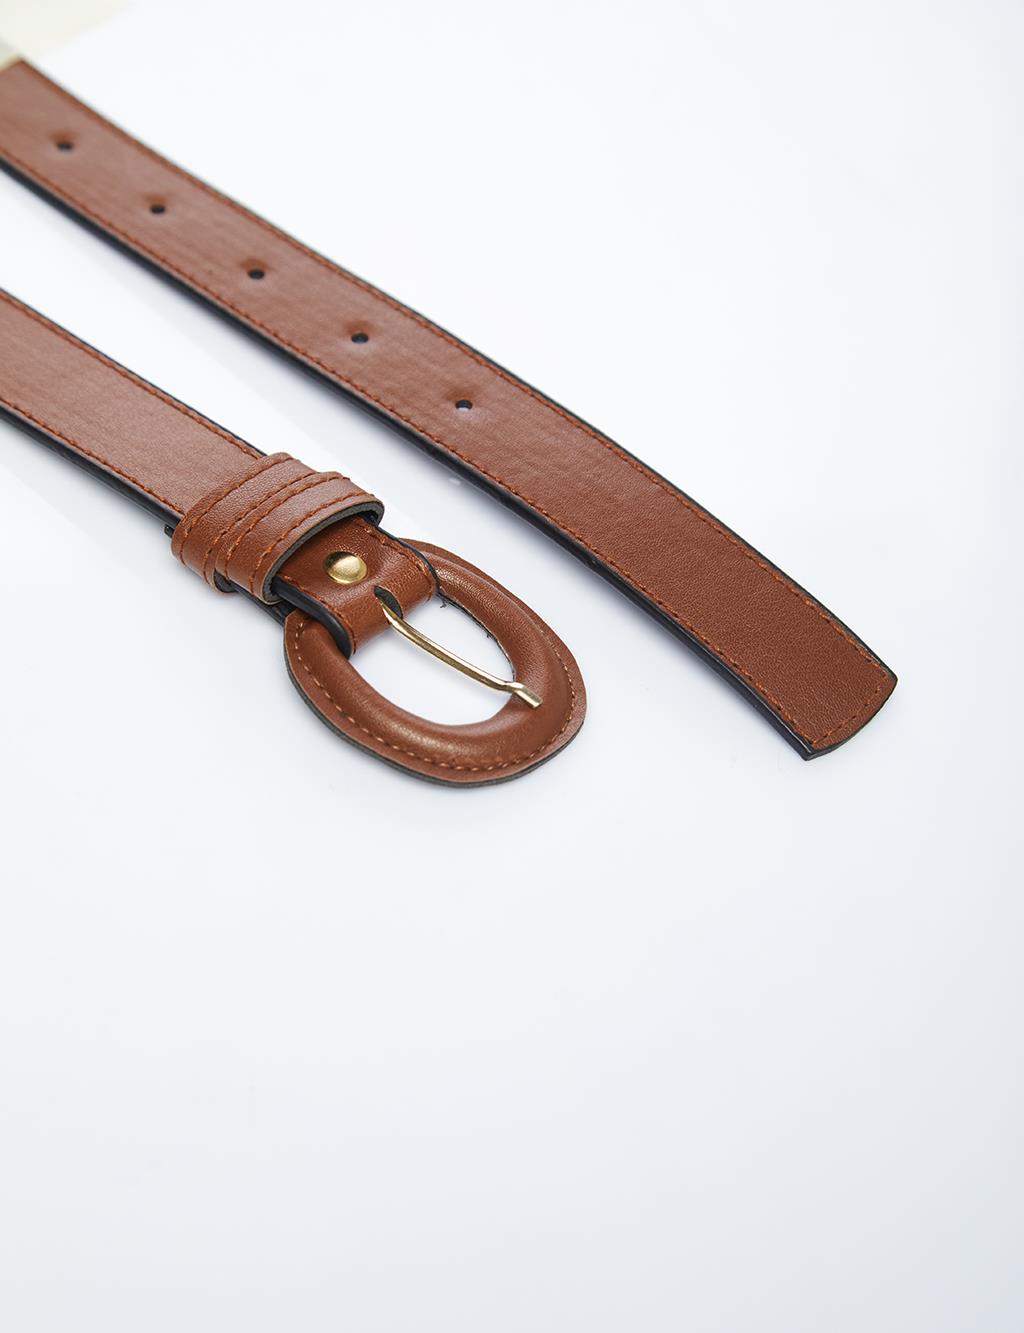 Leather Coated Belt with Buckle - Tan